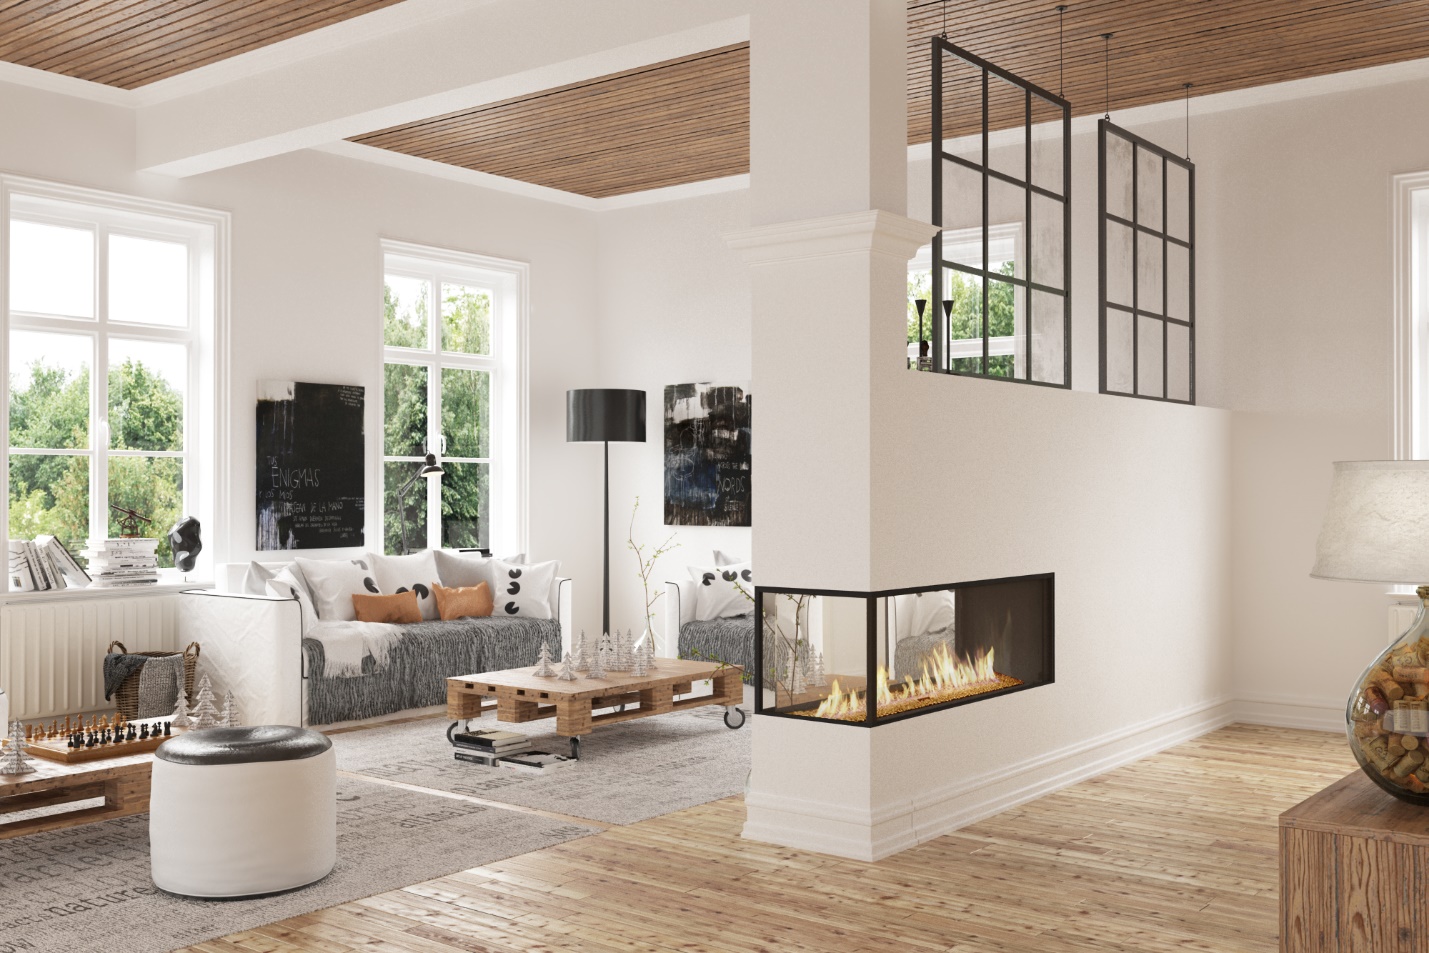 5 Innovative Fireplace Styles for the Modern Home